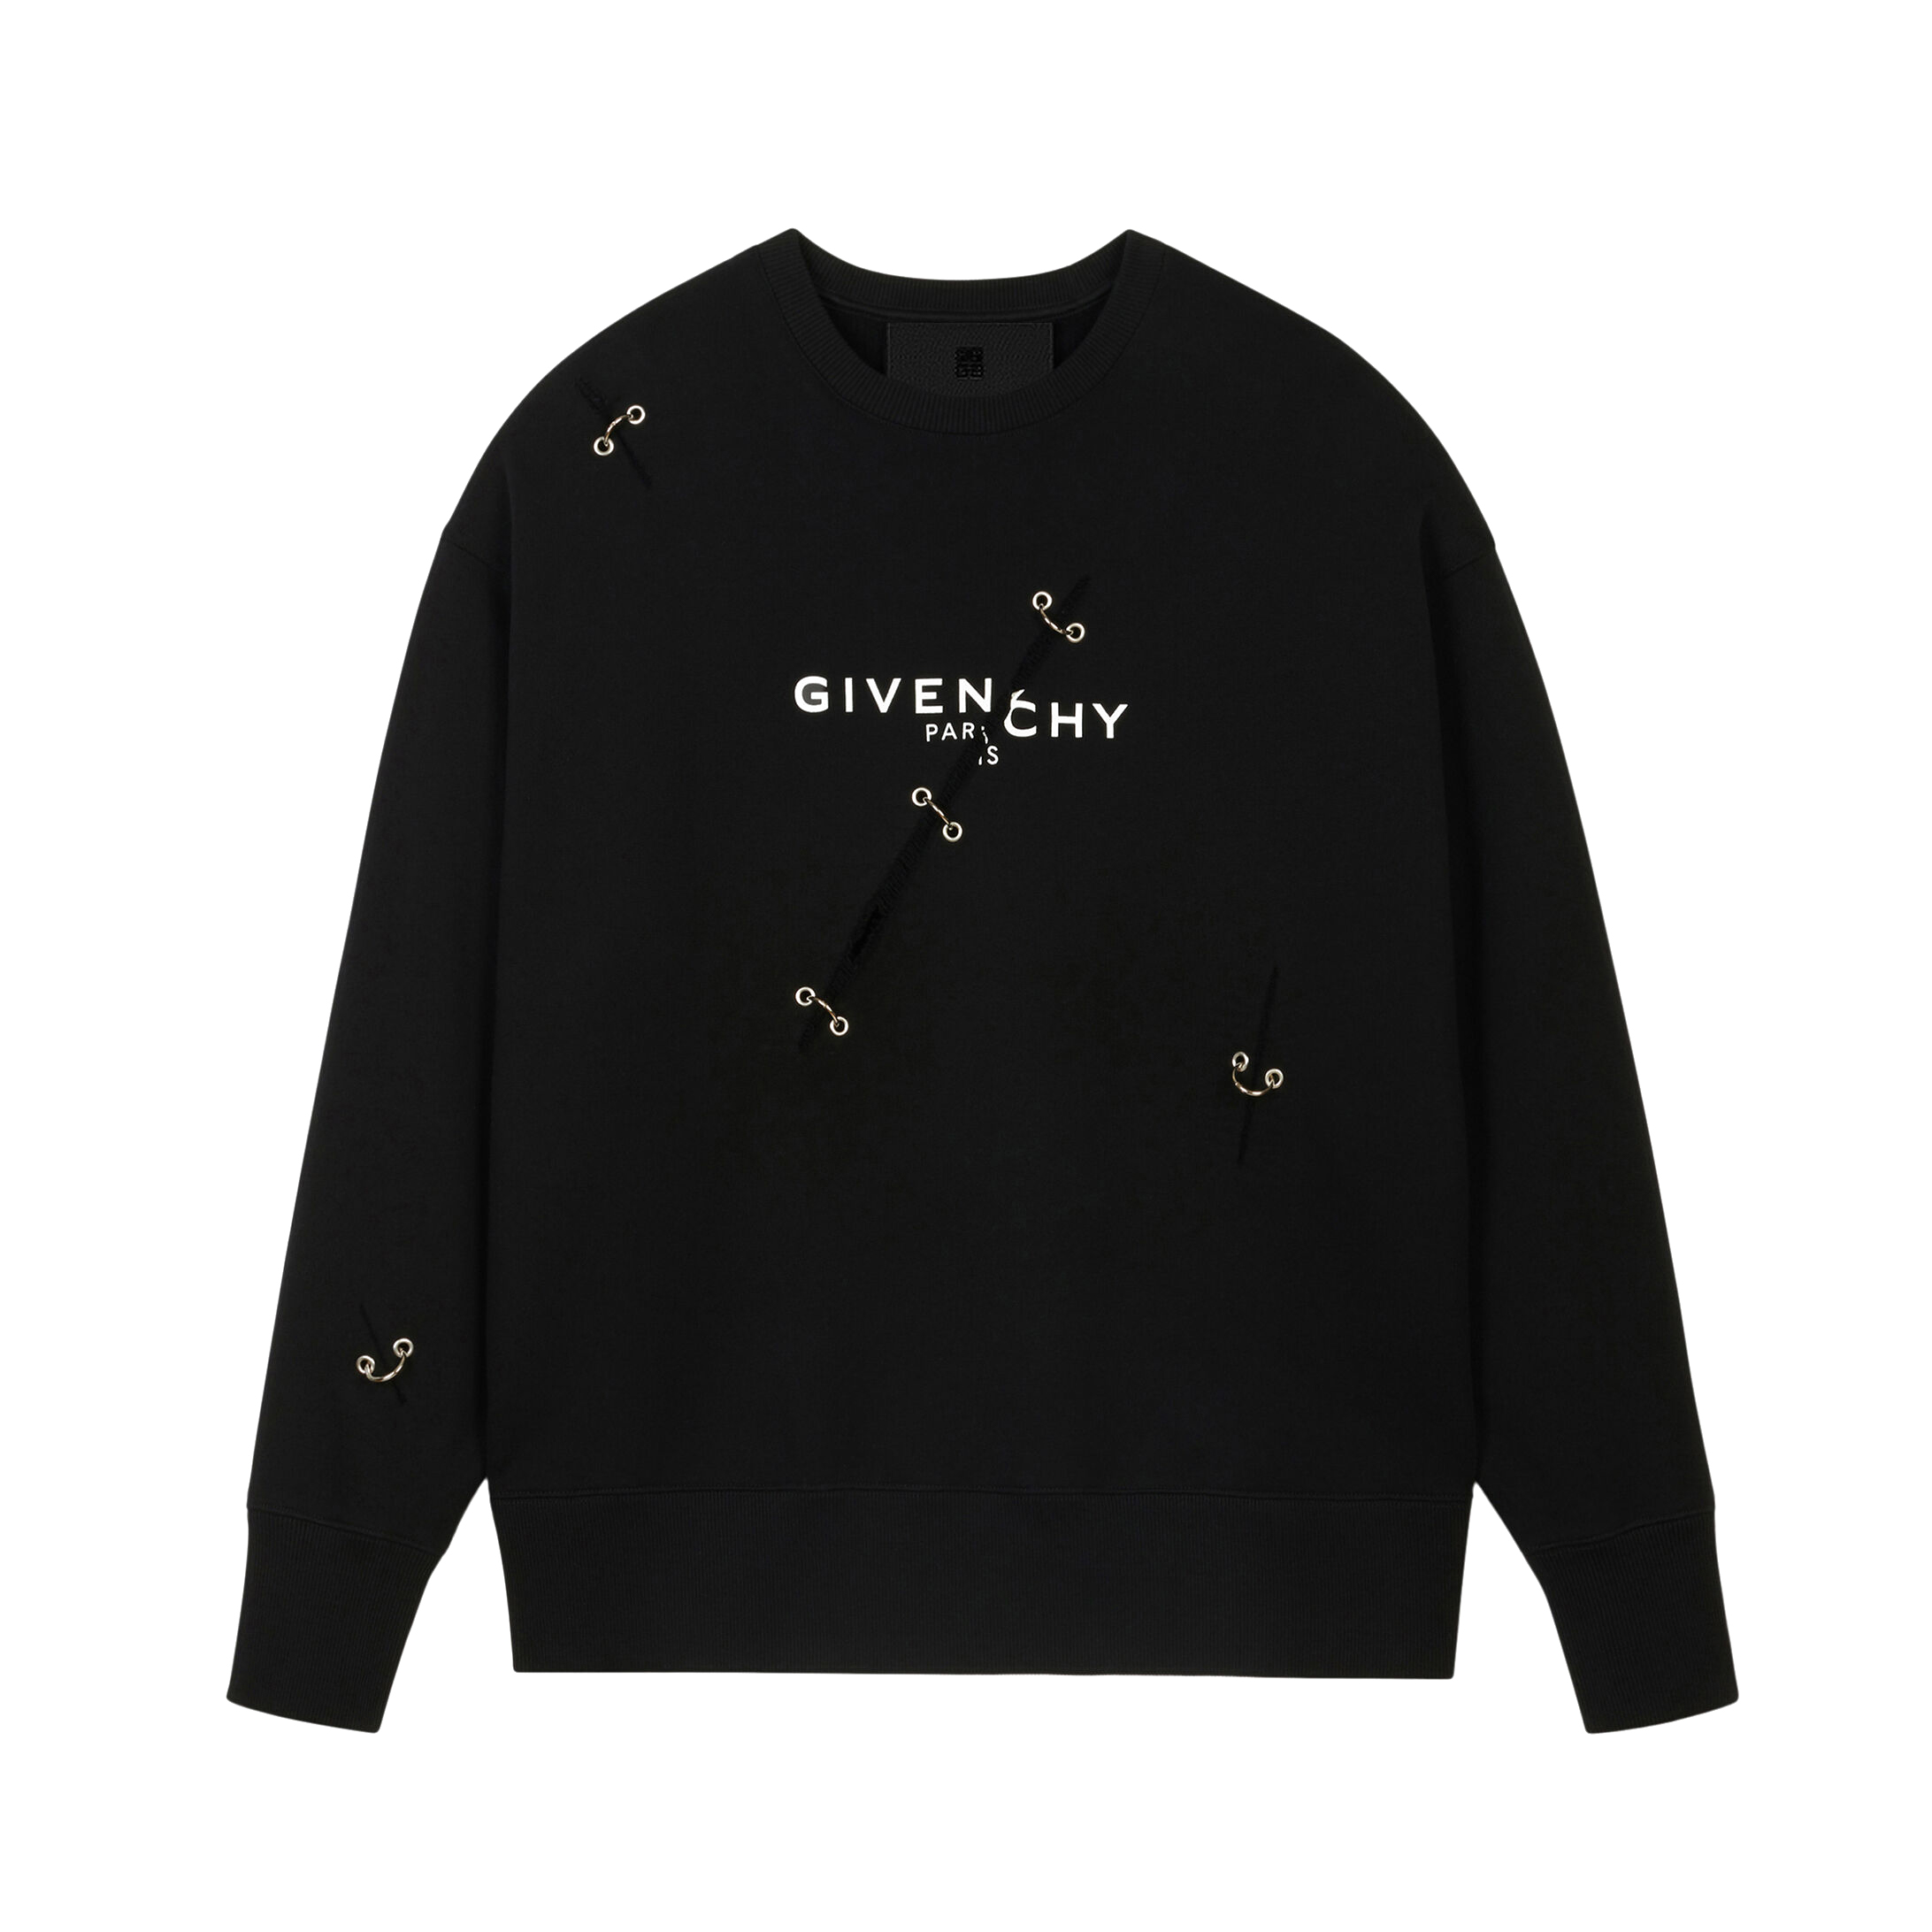 Buy Other Brands Givenchy Streetwear - StockX